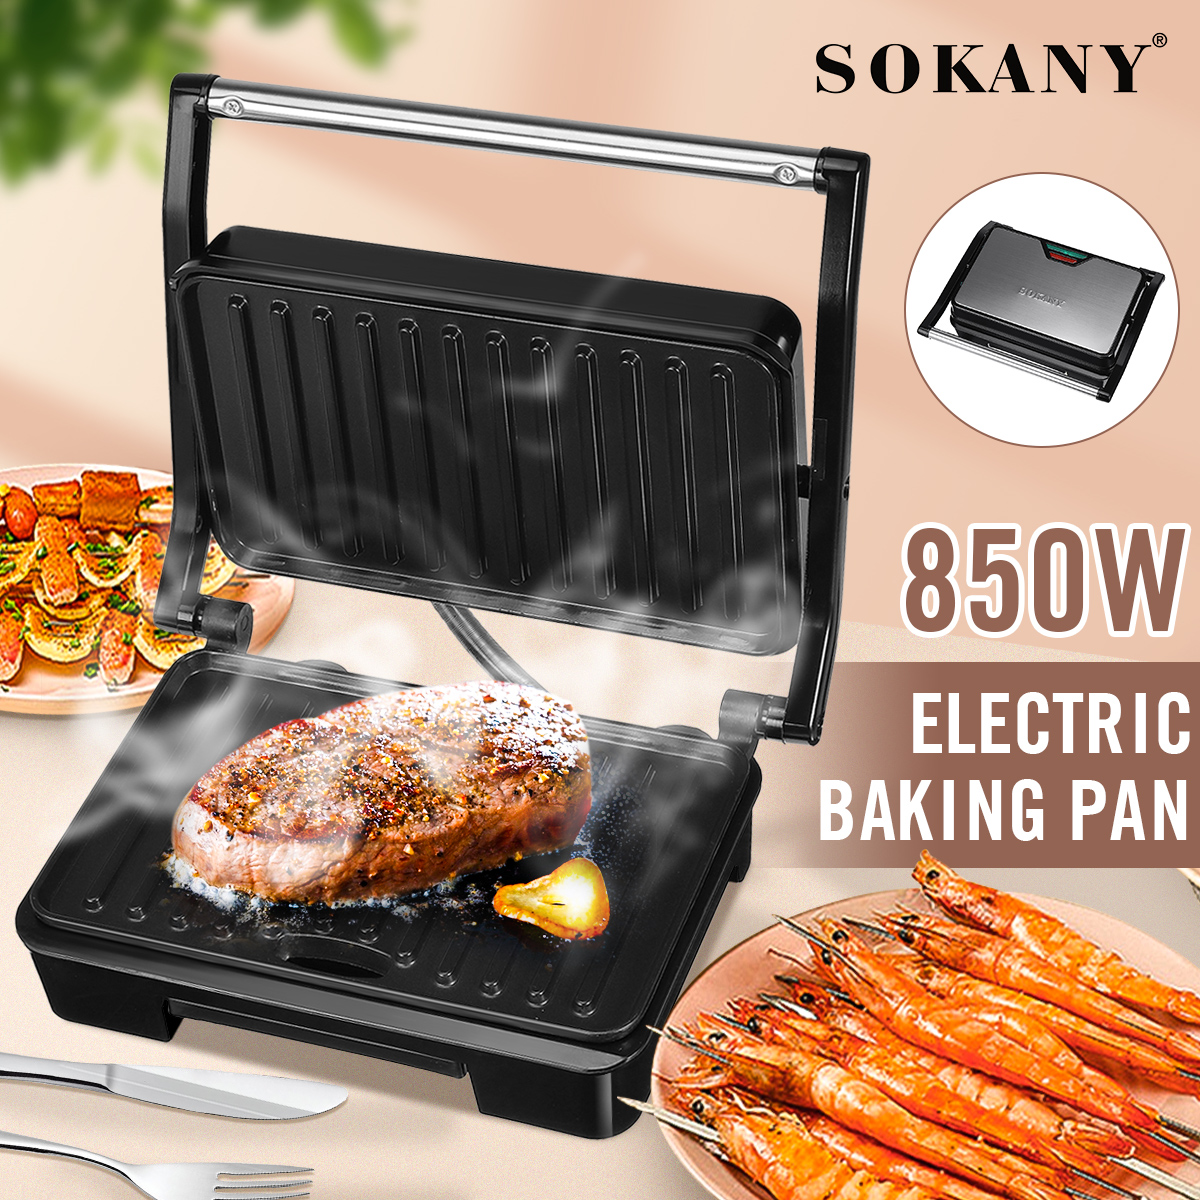 SOKANY-220V-Electric-Sandwich-Steak-Maker-Dual-Toast-Grill-Non-Stick-Surface-Meat-Toaster-Automatic--1931608-1